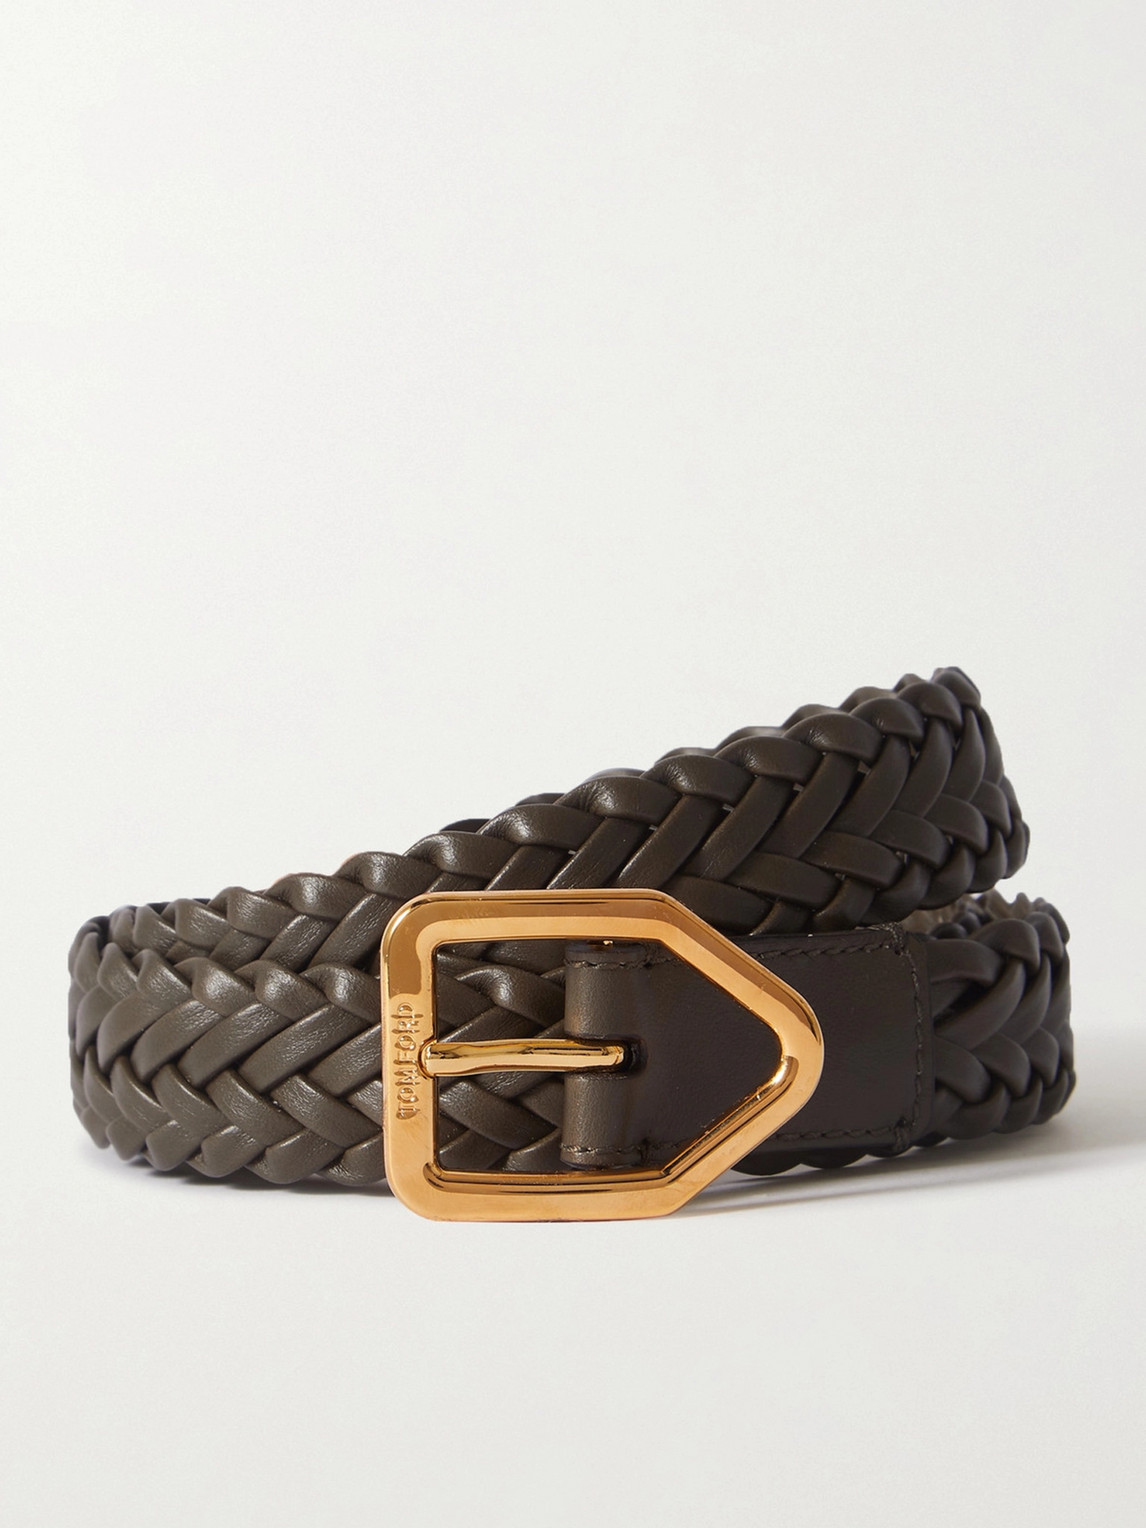 TOM FORD 2.5CM WOVEN LEATHER BELT